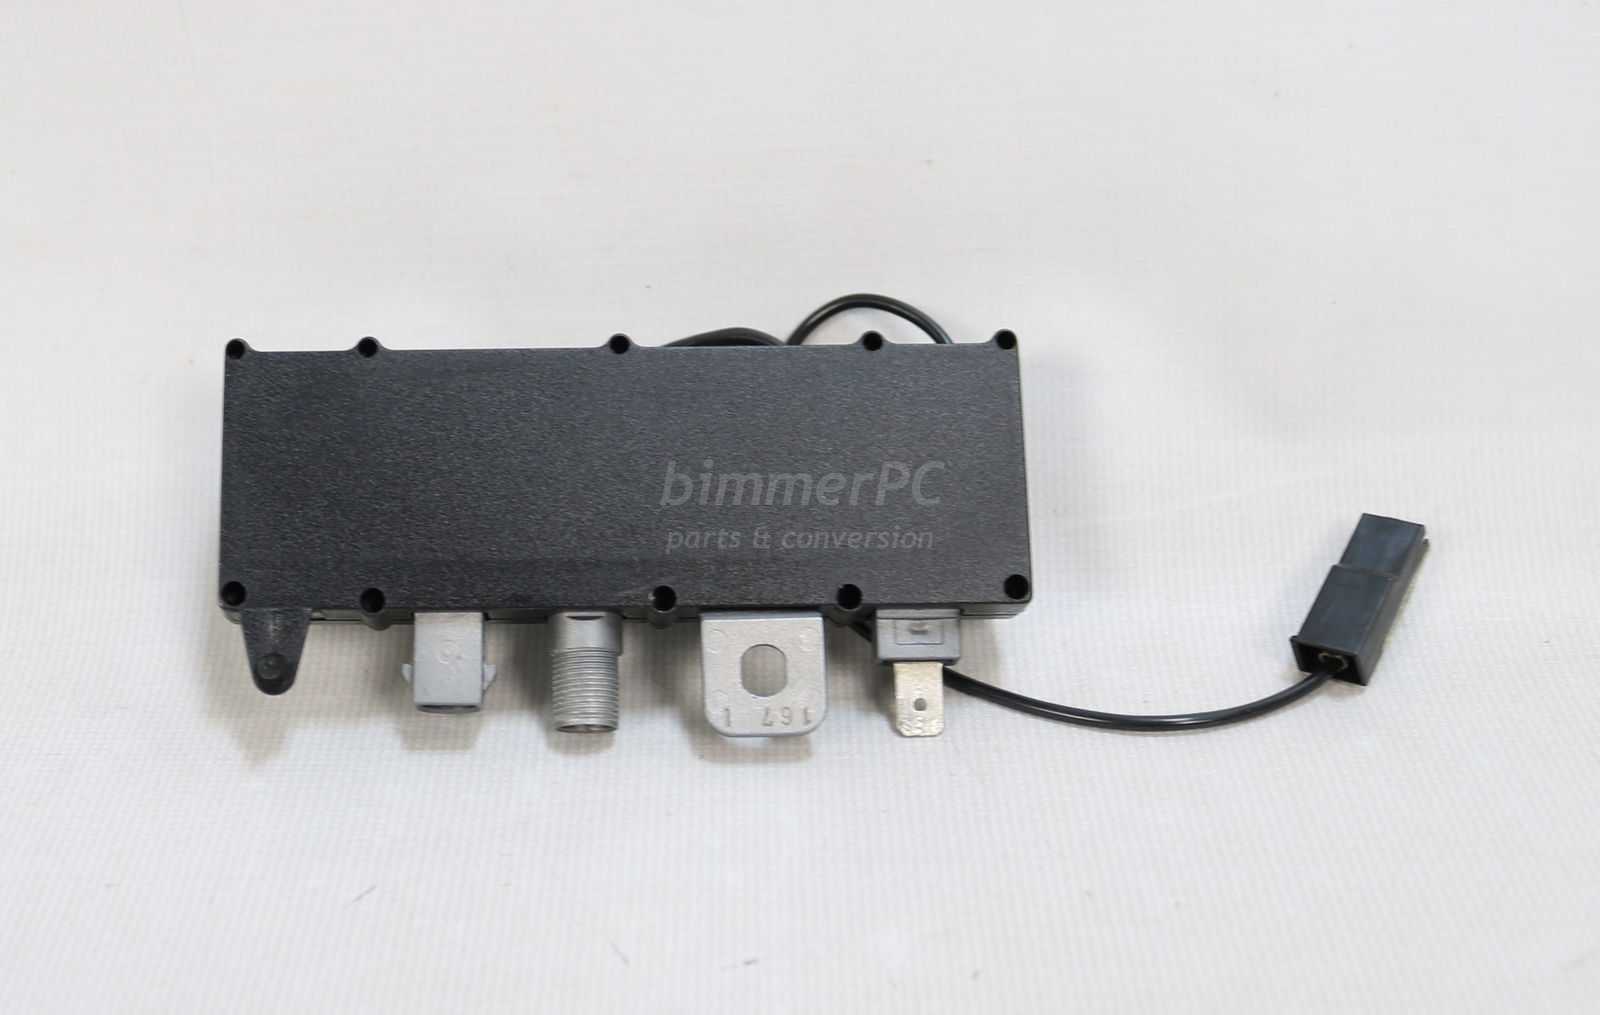 Picture of BMW 65258375174 Radio Antenna Amplifier Right Side Module Unit Trap Circuit E36 for sale